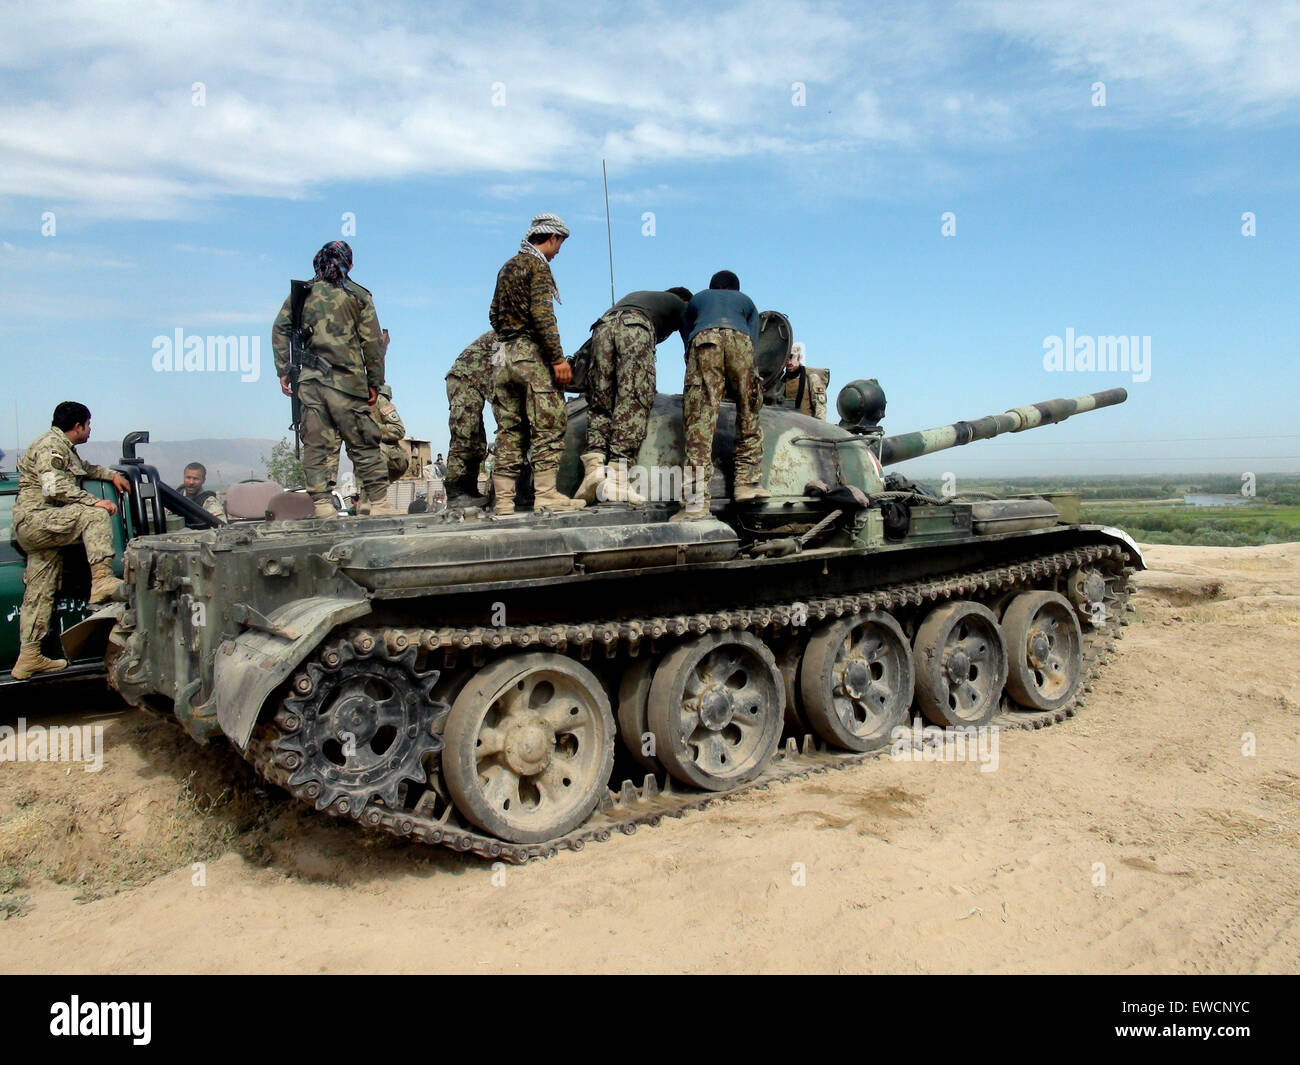 (150623) -- KUNDUZ, June 23, 2015 (Xinhua) -- Afghan soldiers keep watch on a military tank during an operation against Taliban in Kunduz province, northern Afghanistan, June 23, 2015. Afghan National Security Forces (ANSF) on Tuesday recaptured a district in northern province of Kunduz seized by Taliban militants over the weekend, killing over 80 rebels, provincial government spokesman said. (Xinhua/Ajmal) (zjy) Stock Photo